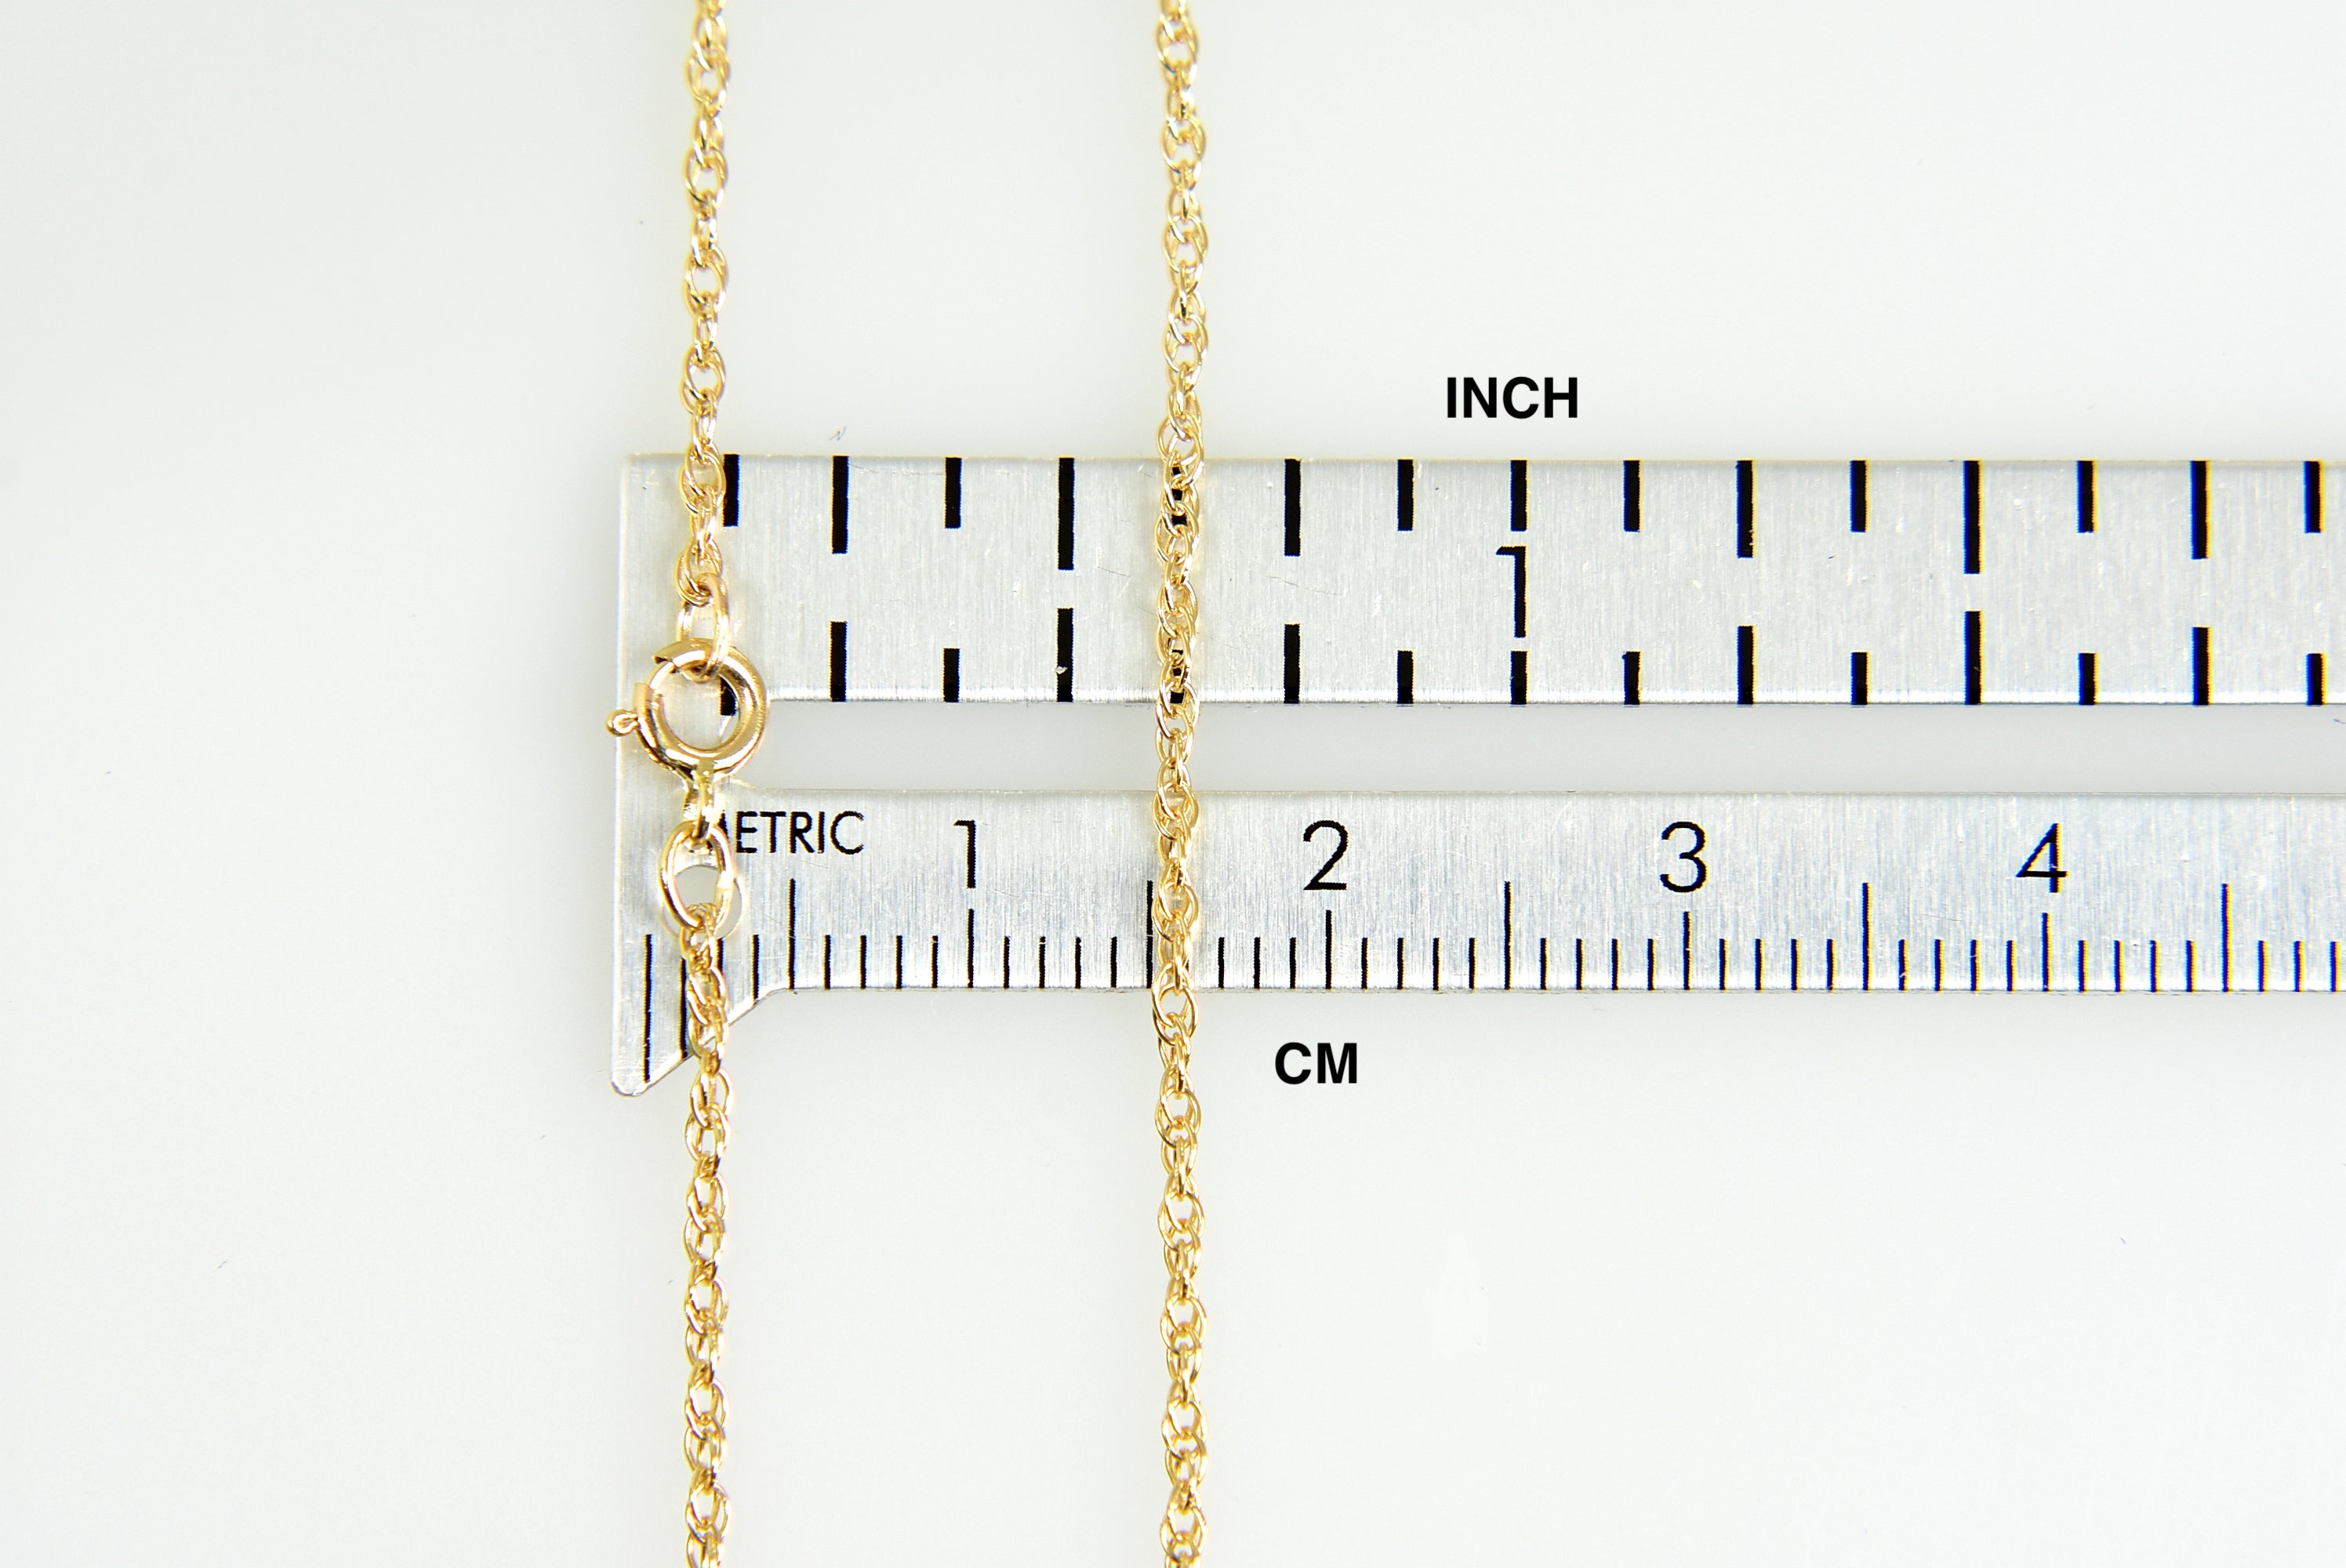 14k Yellow Gold 1.15mm Cable Rope Bracelet Anklet Necklace Choker Pendant Chain